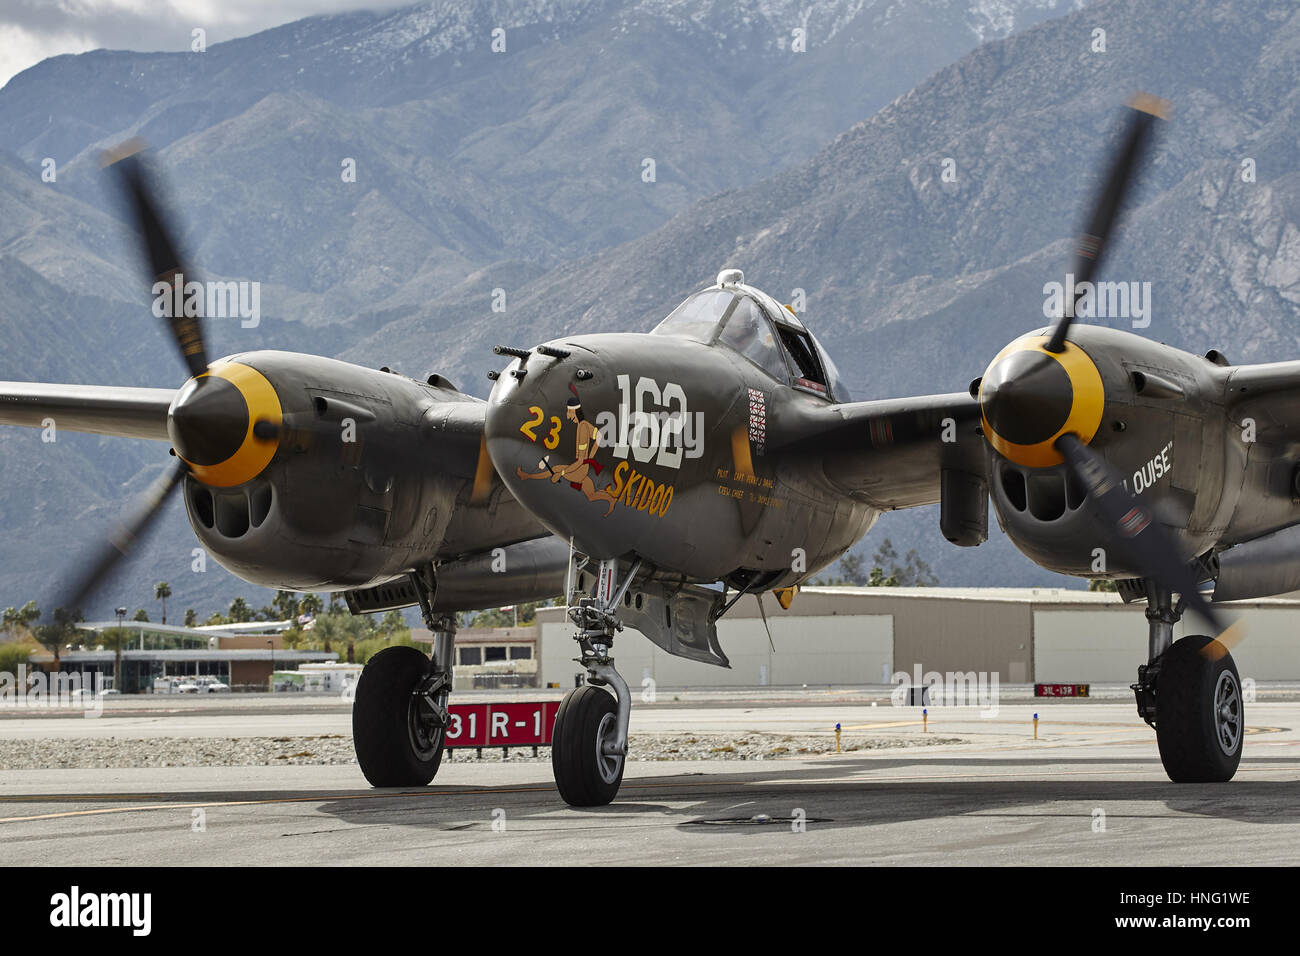 Palm Springs, CA, USA. 11th Feb, 2017. One of the very few still flying World War II P-38 Lightning fighters arriving at the Palm Springs Air Museum Credit: Ian L. Sitren/ZUMA Wire/Alamy Live News Stock Photo